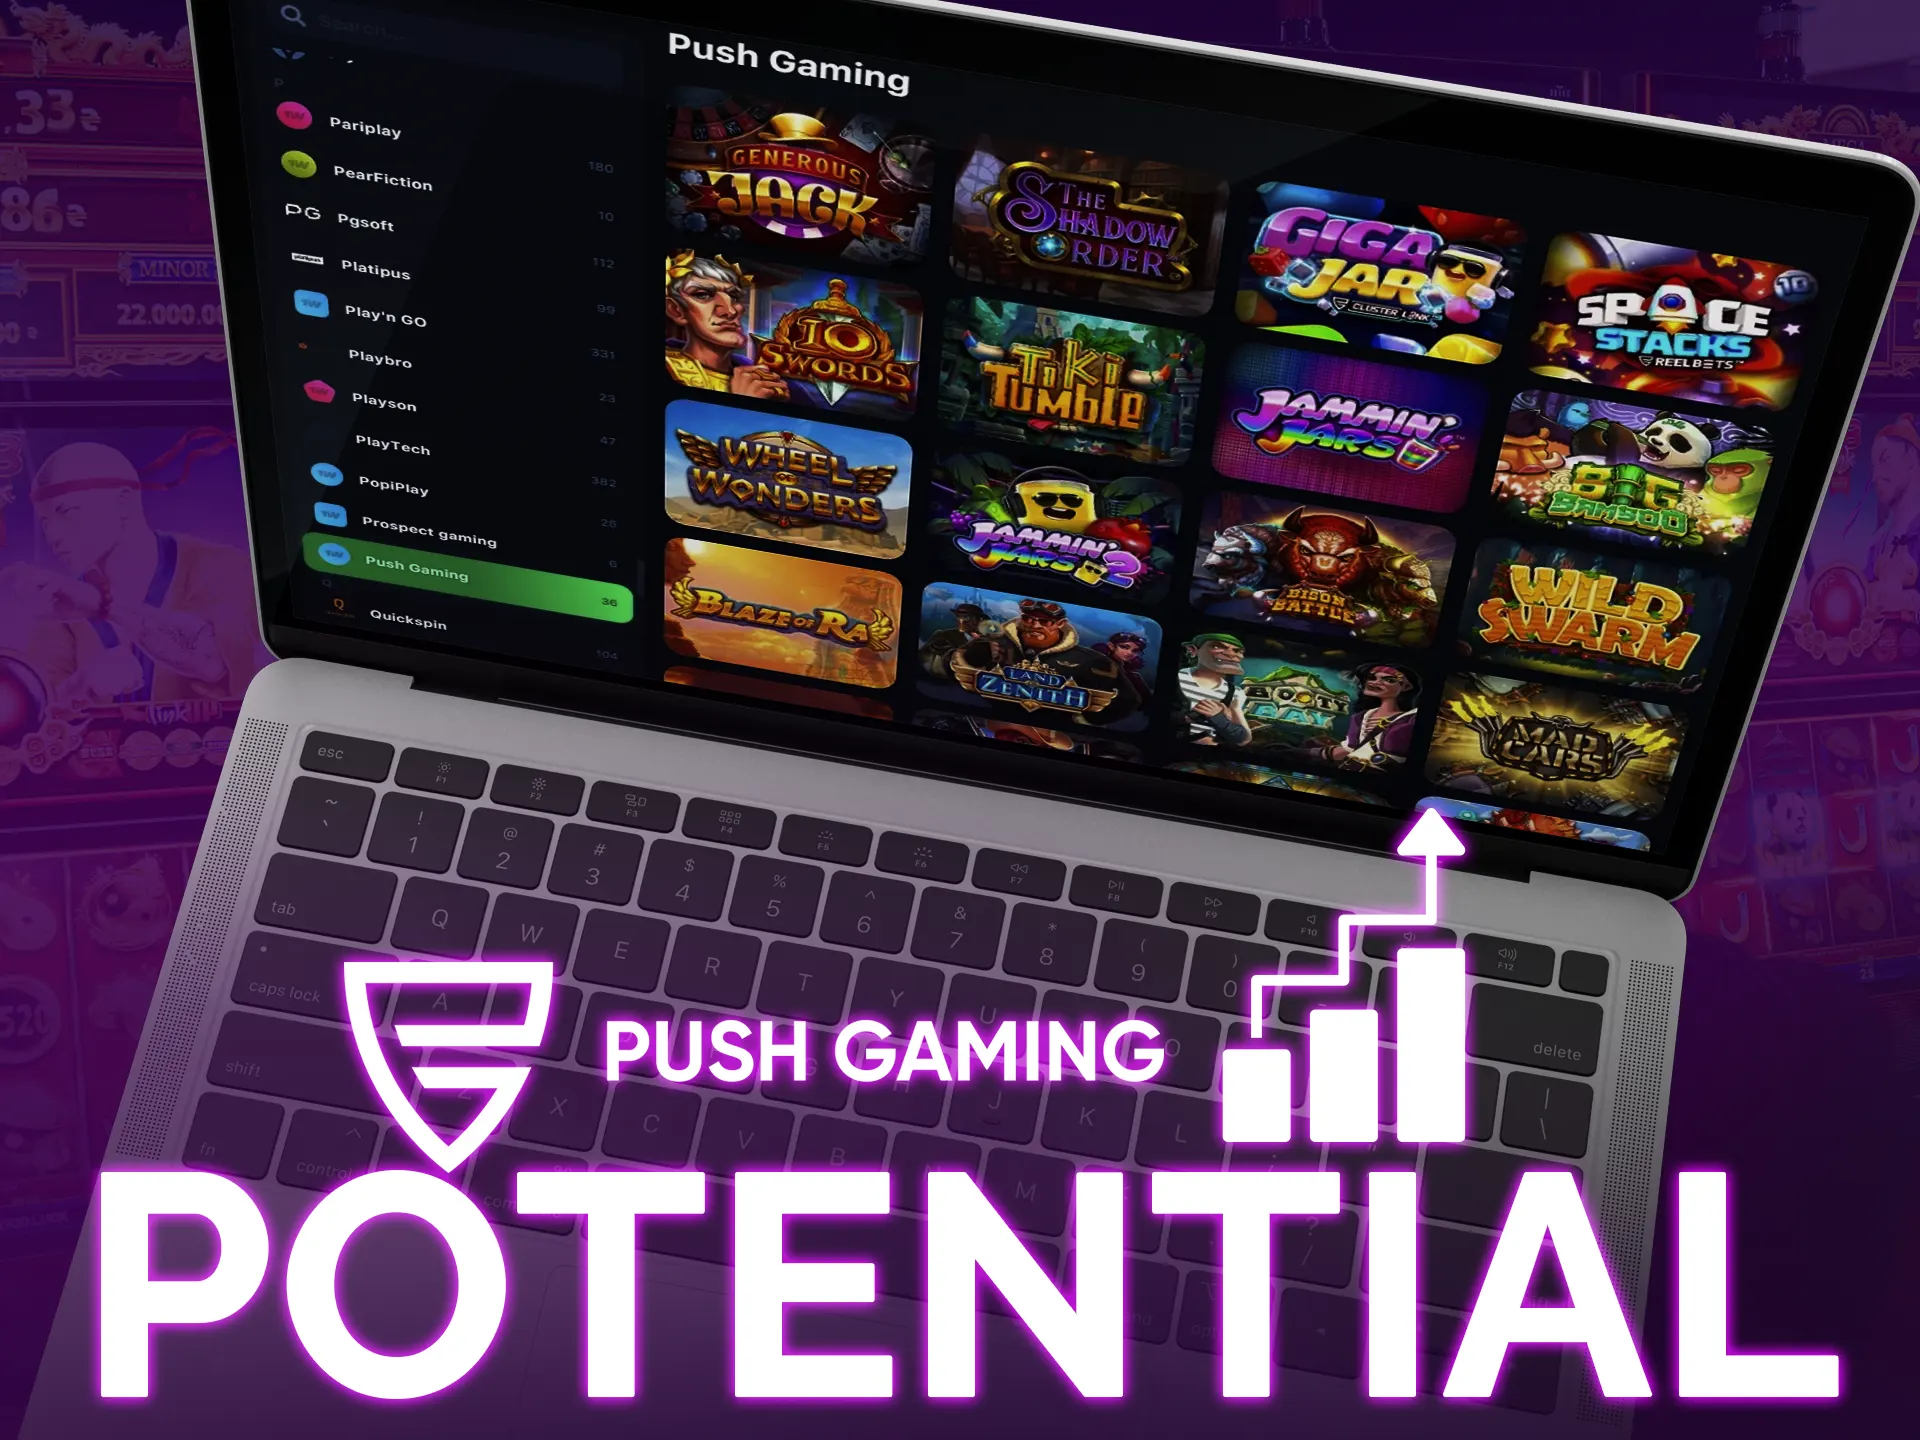 Enjor high potential of winnings with Push Gaming slots.